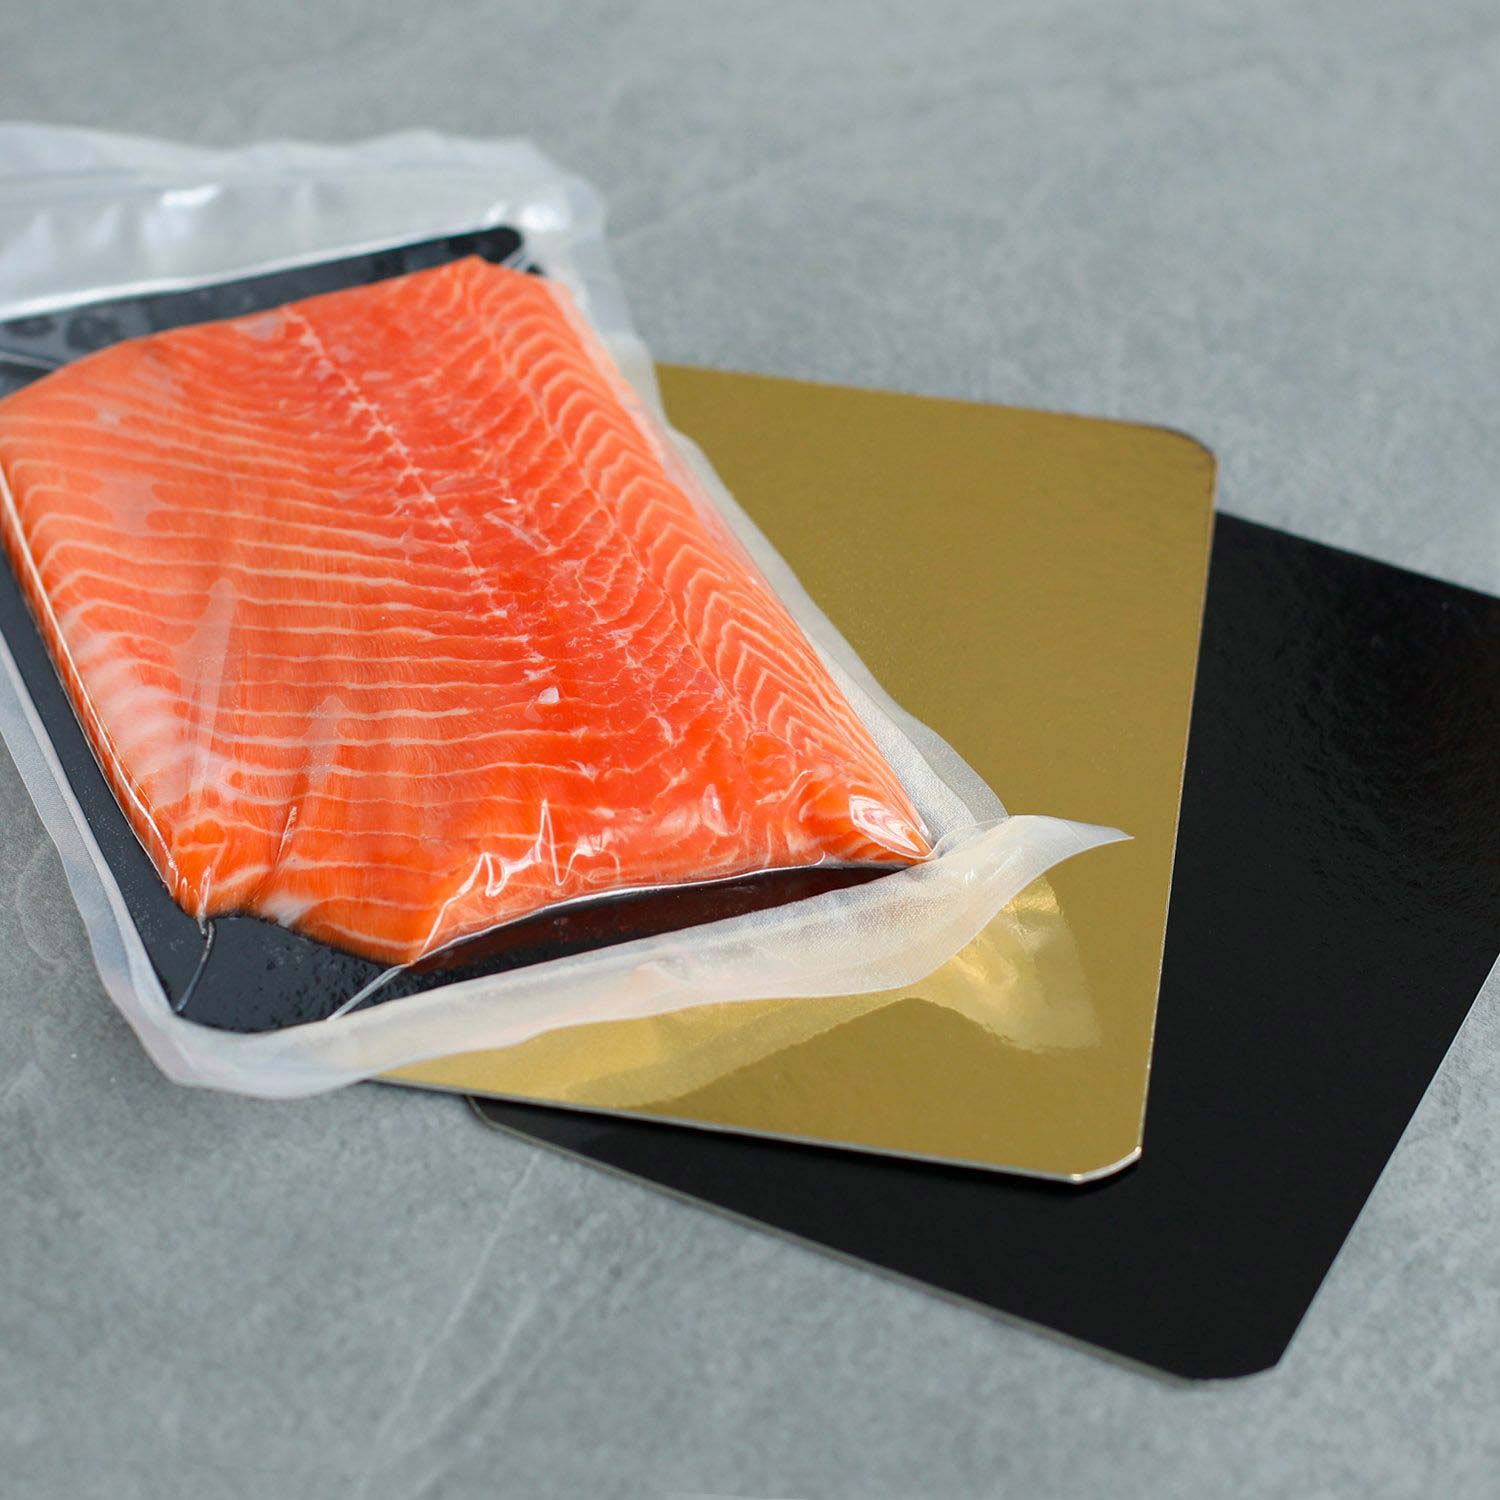 Salmon boards with golden and black side, along with vacuum-sealed salmon fillet